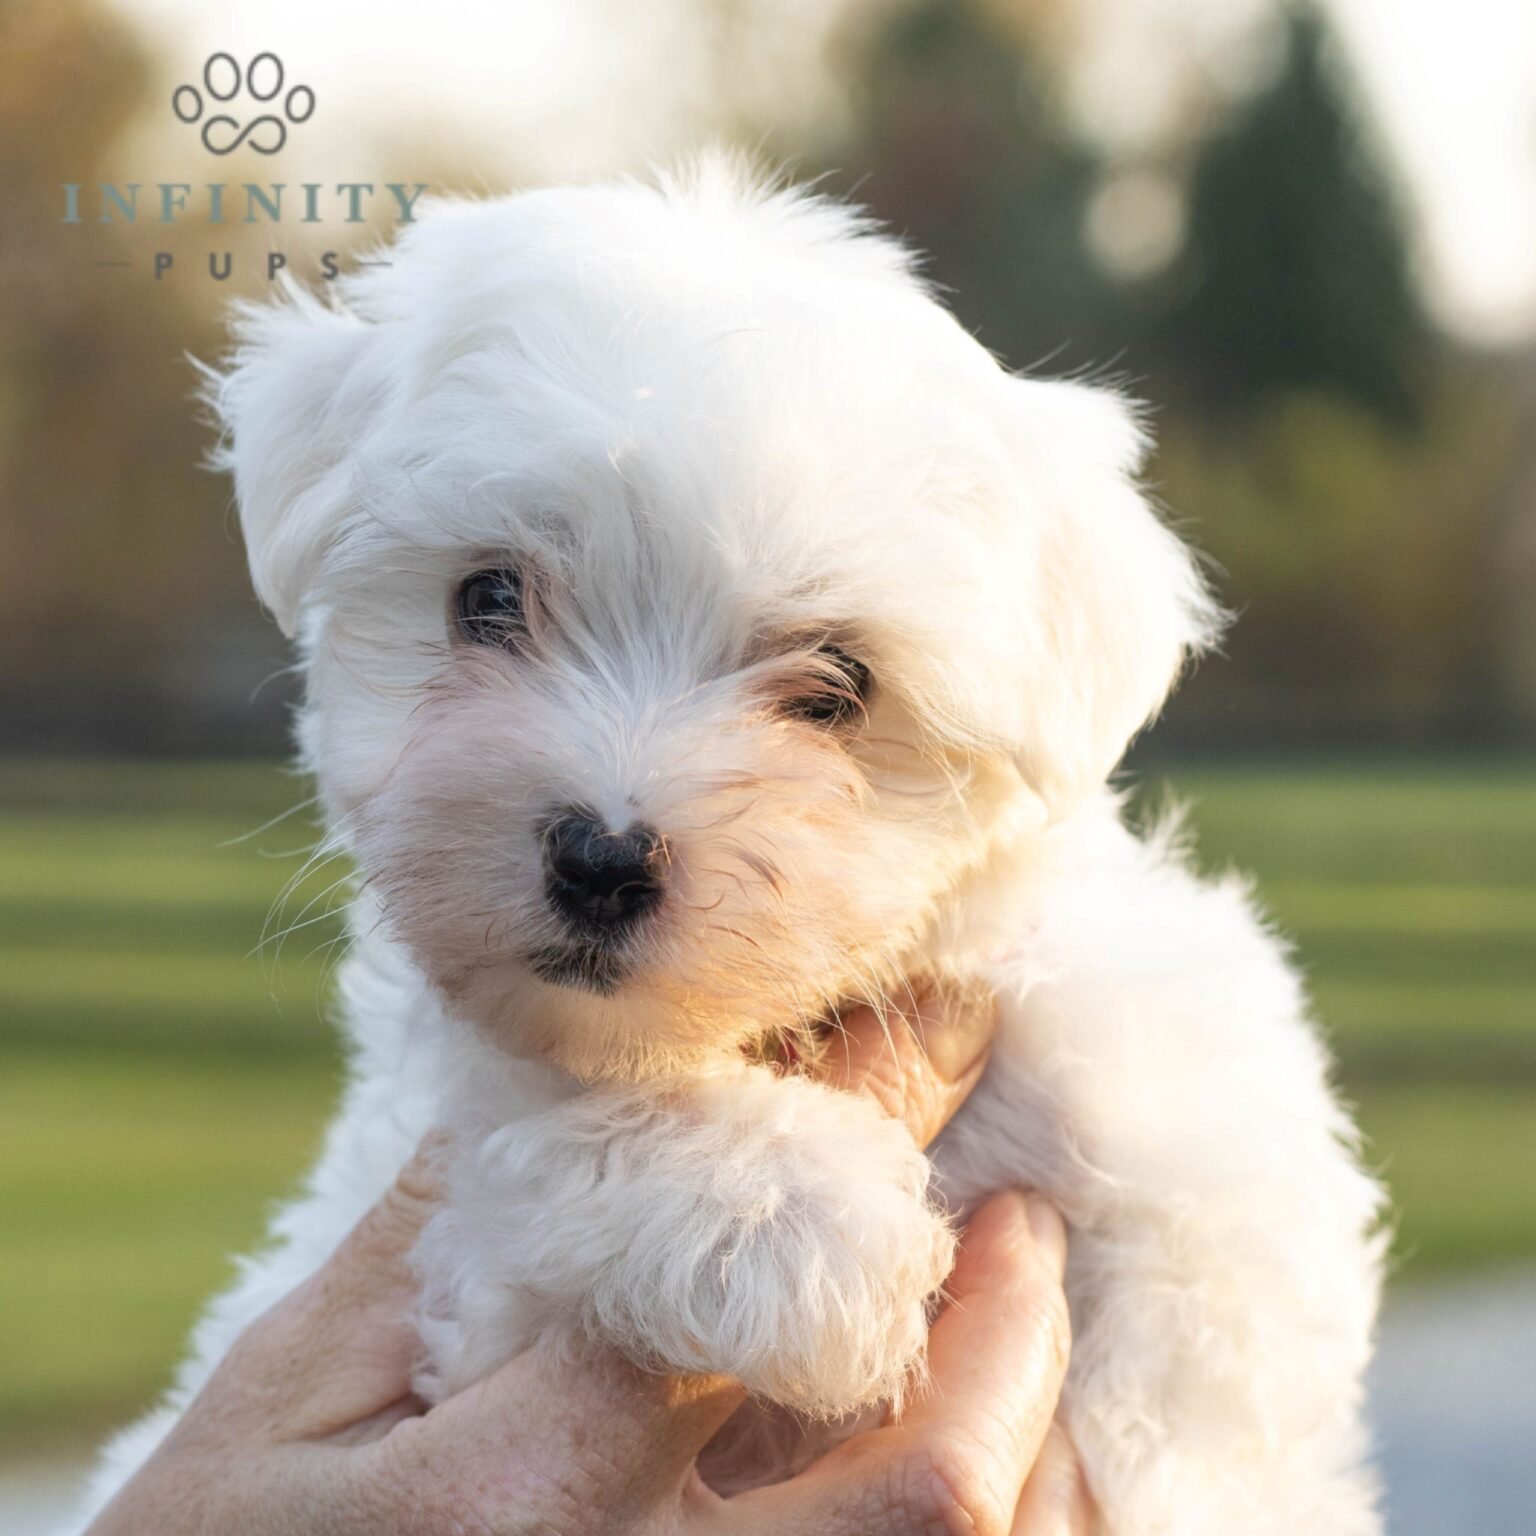 Feather - AKC Maltese puppy in hand